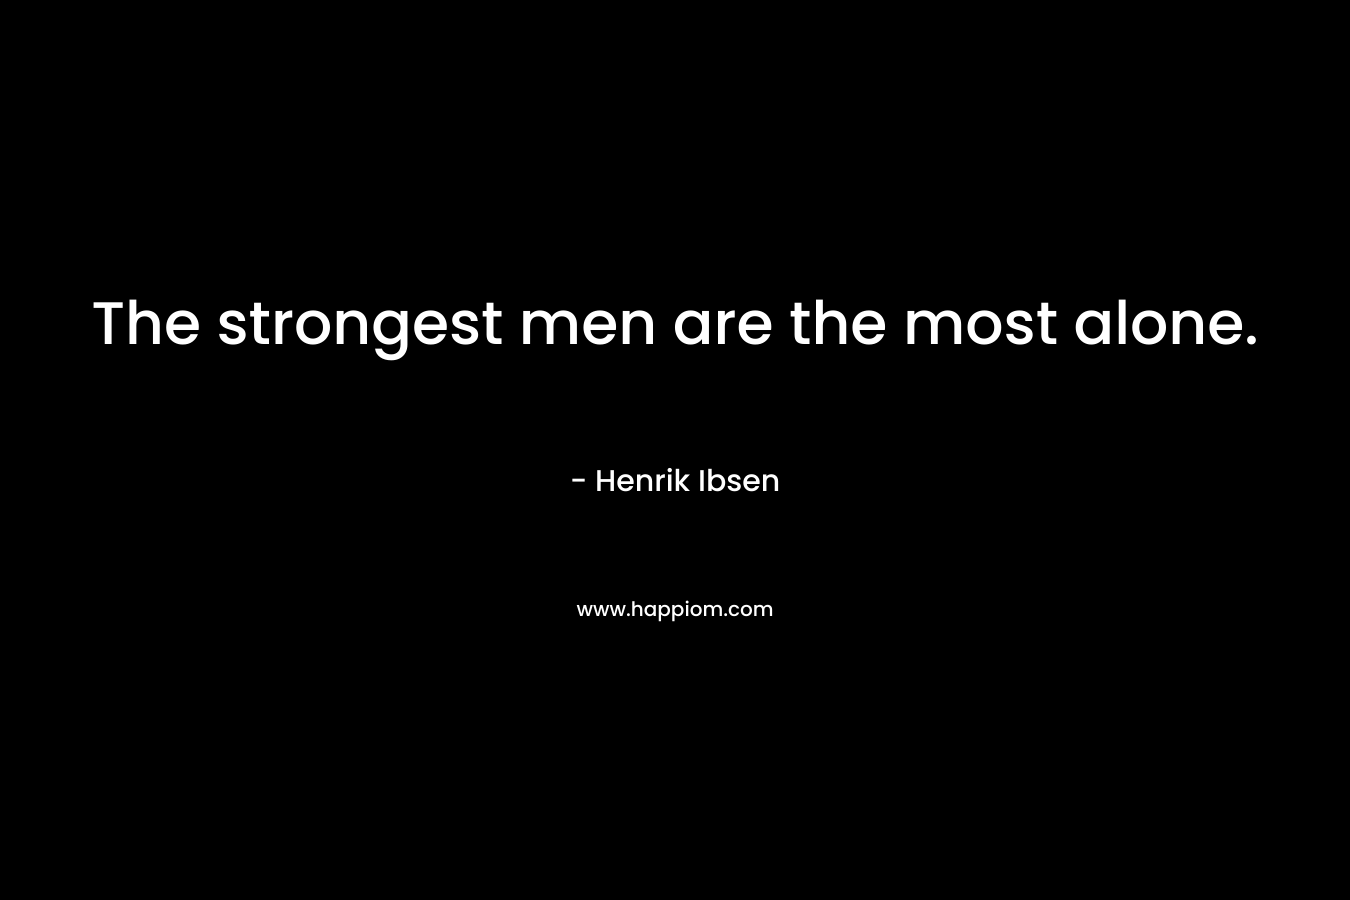 The strongest men are the most alone.